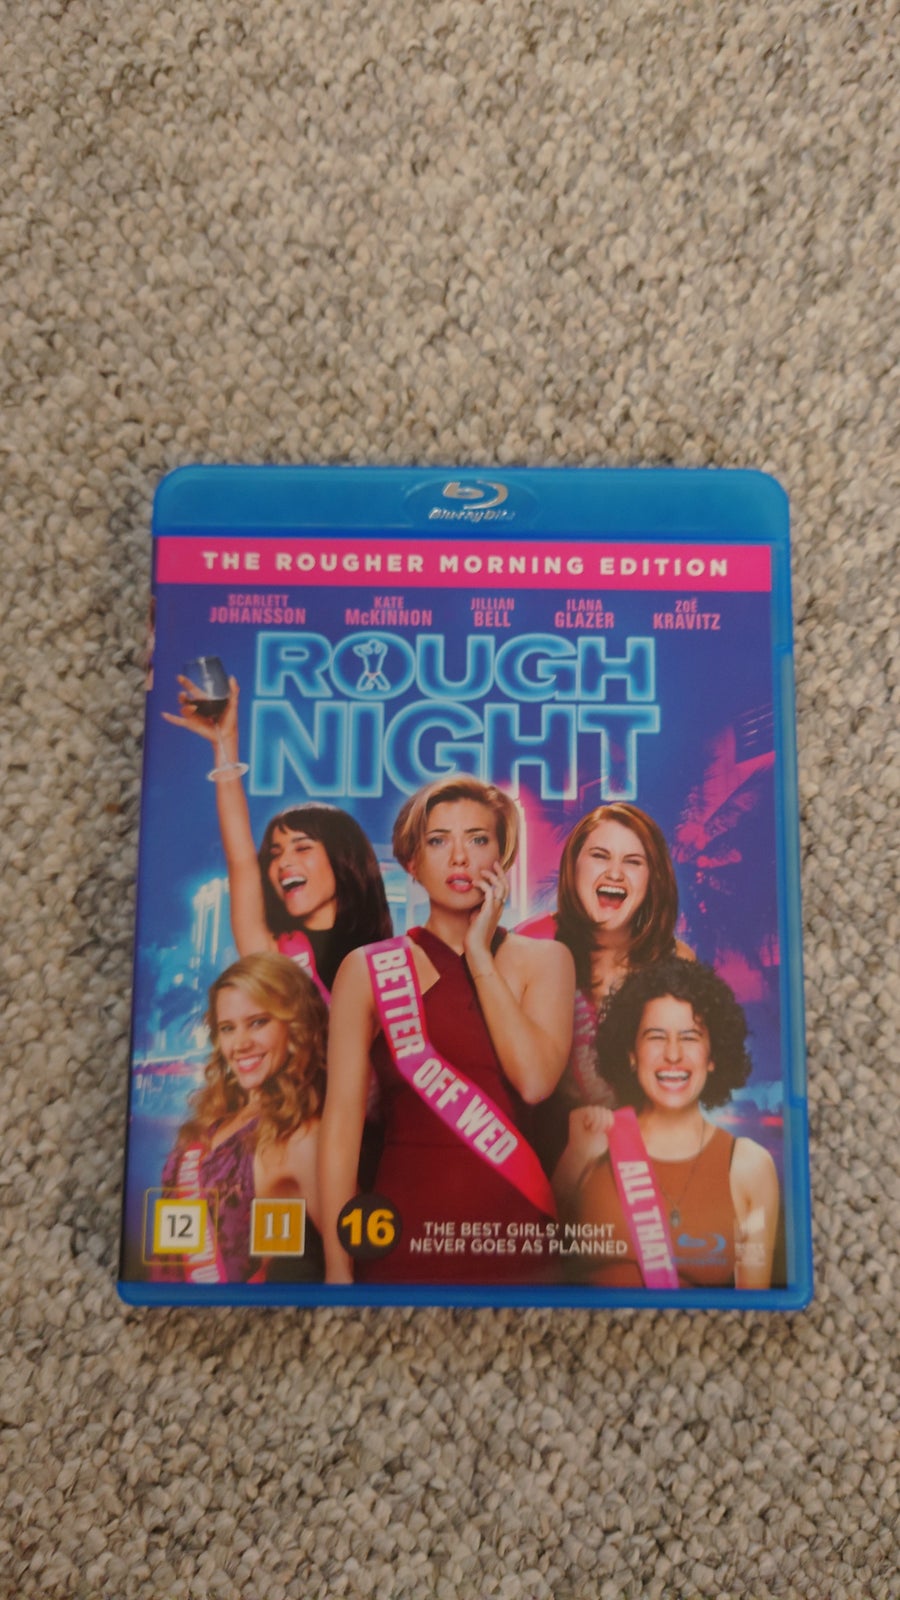 Rough Night Blu-ray (The Rougher Morning Edition)